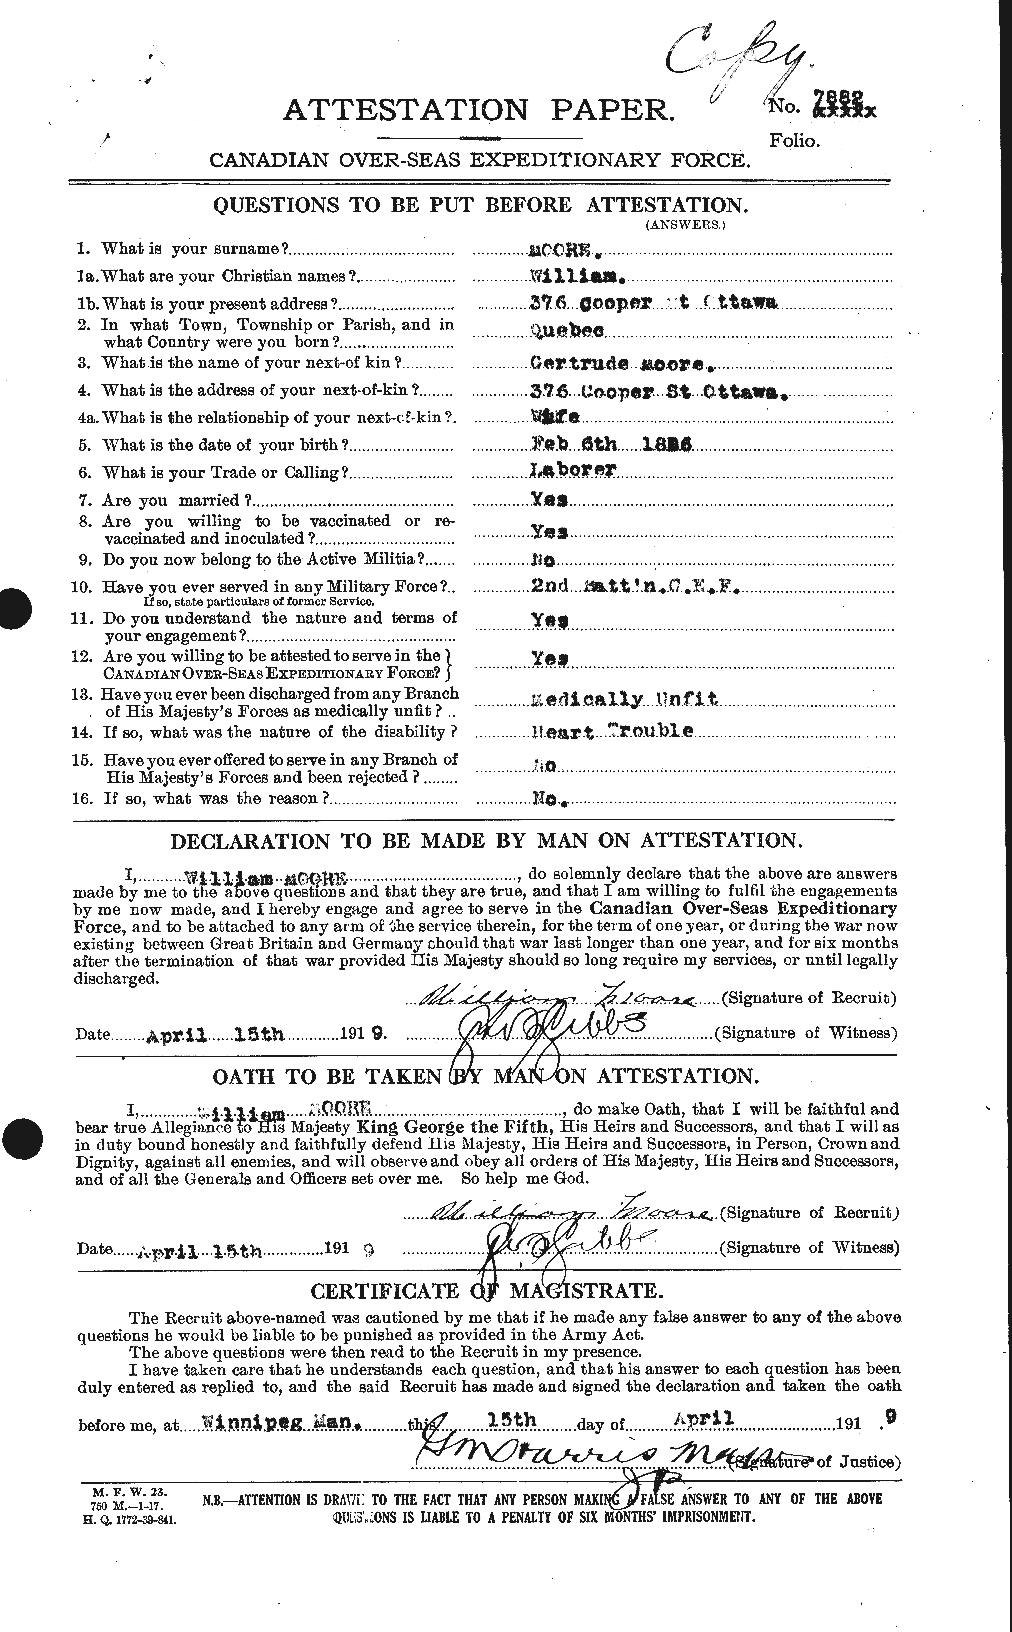 Personnel Records of the First World War - CEF 505755a